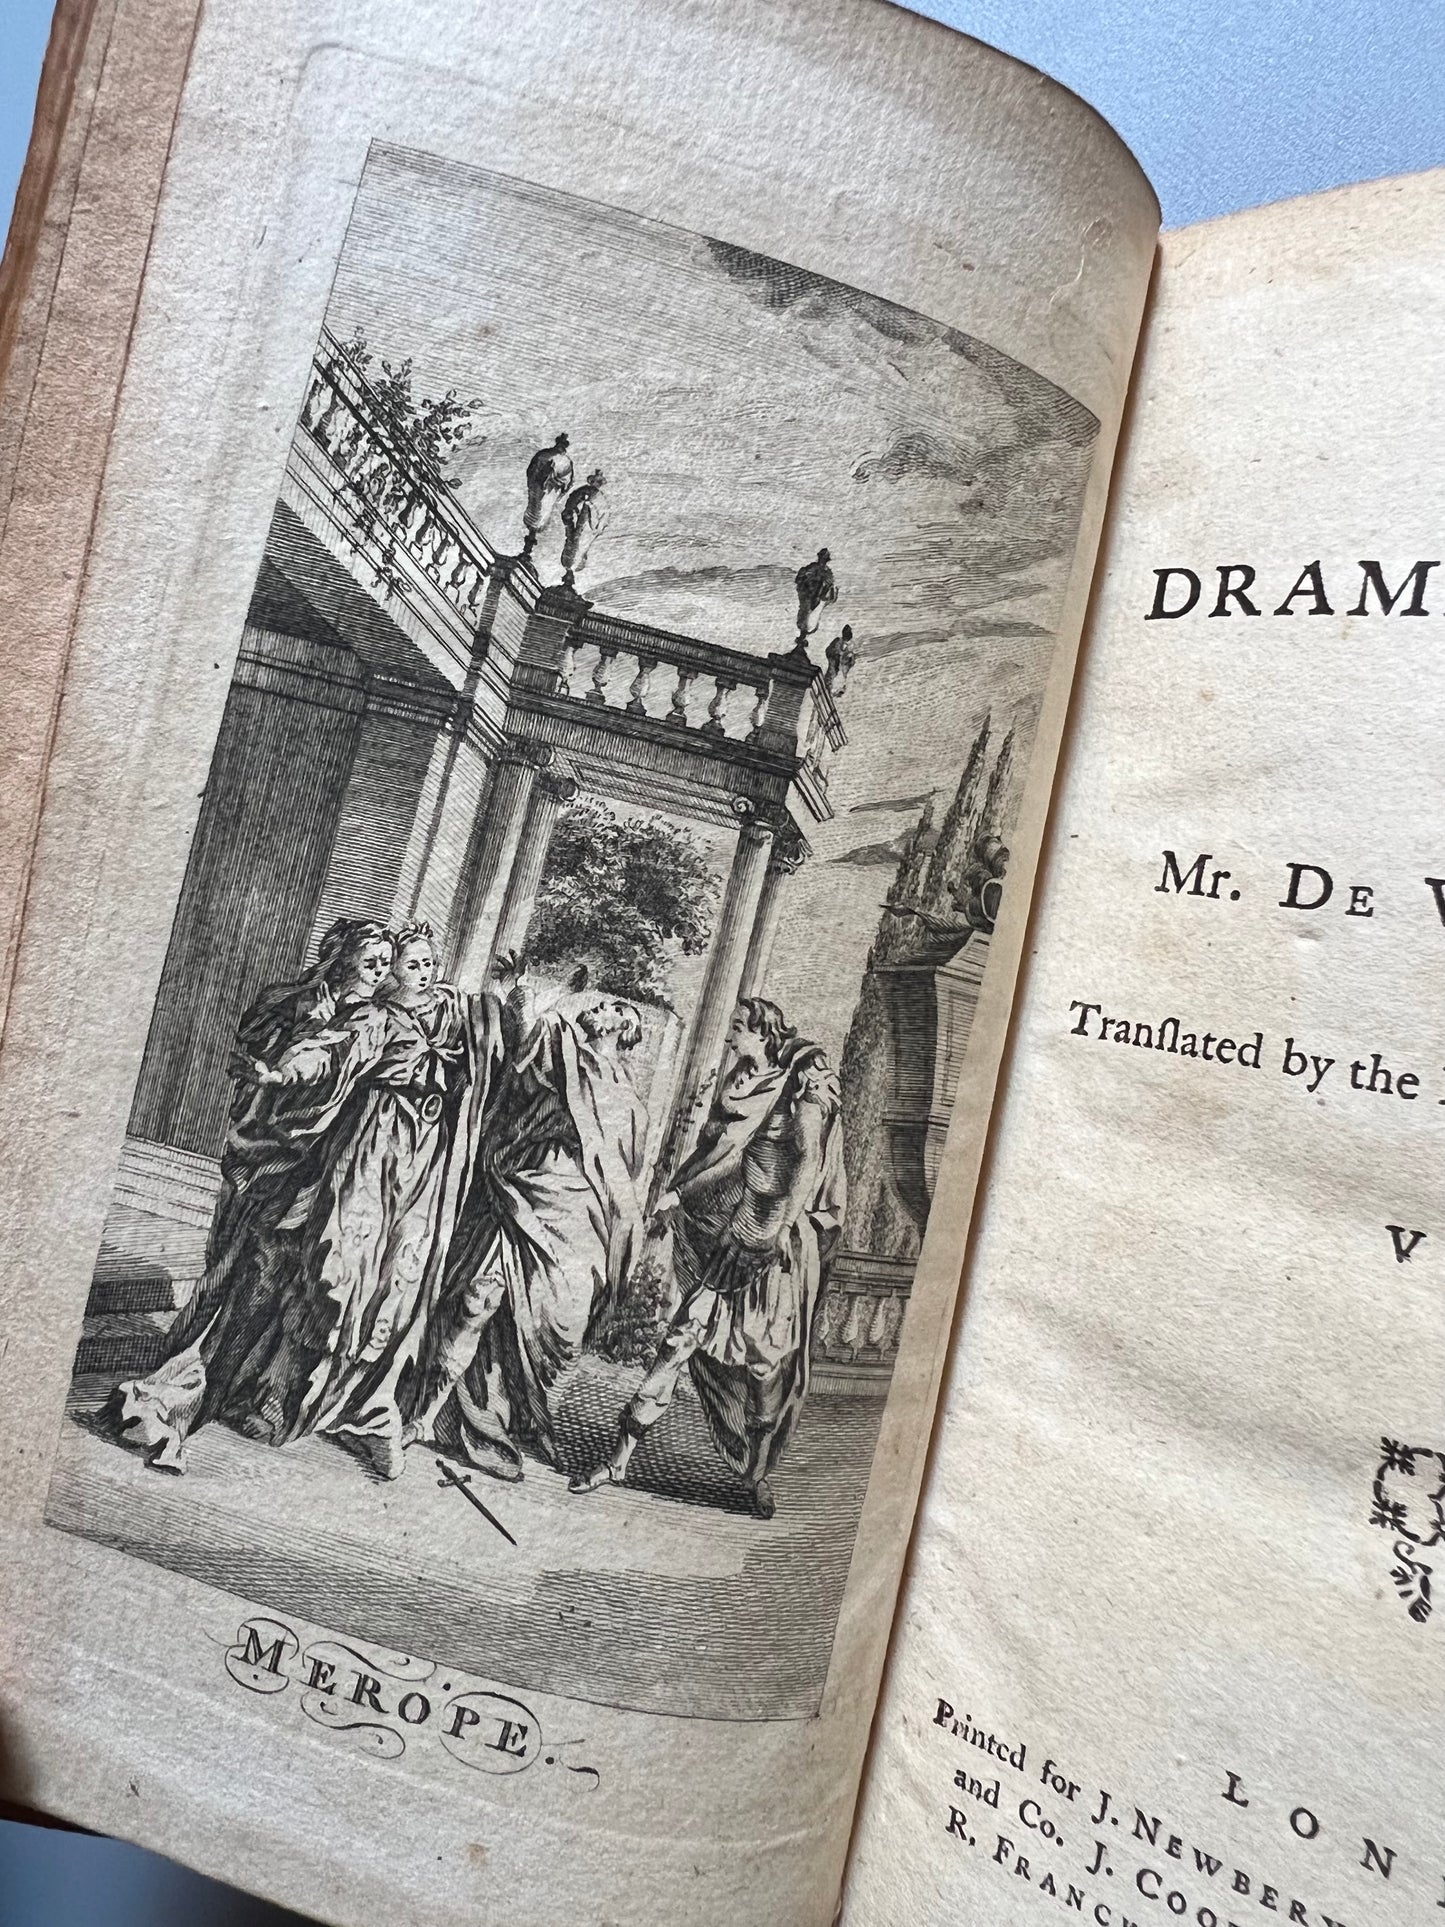 The dramatic works of Voltaire, vol. IV - Londres, 1762